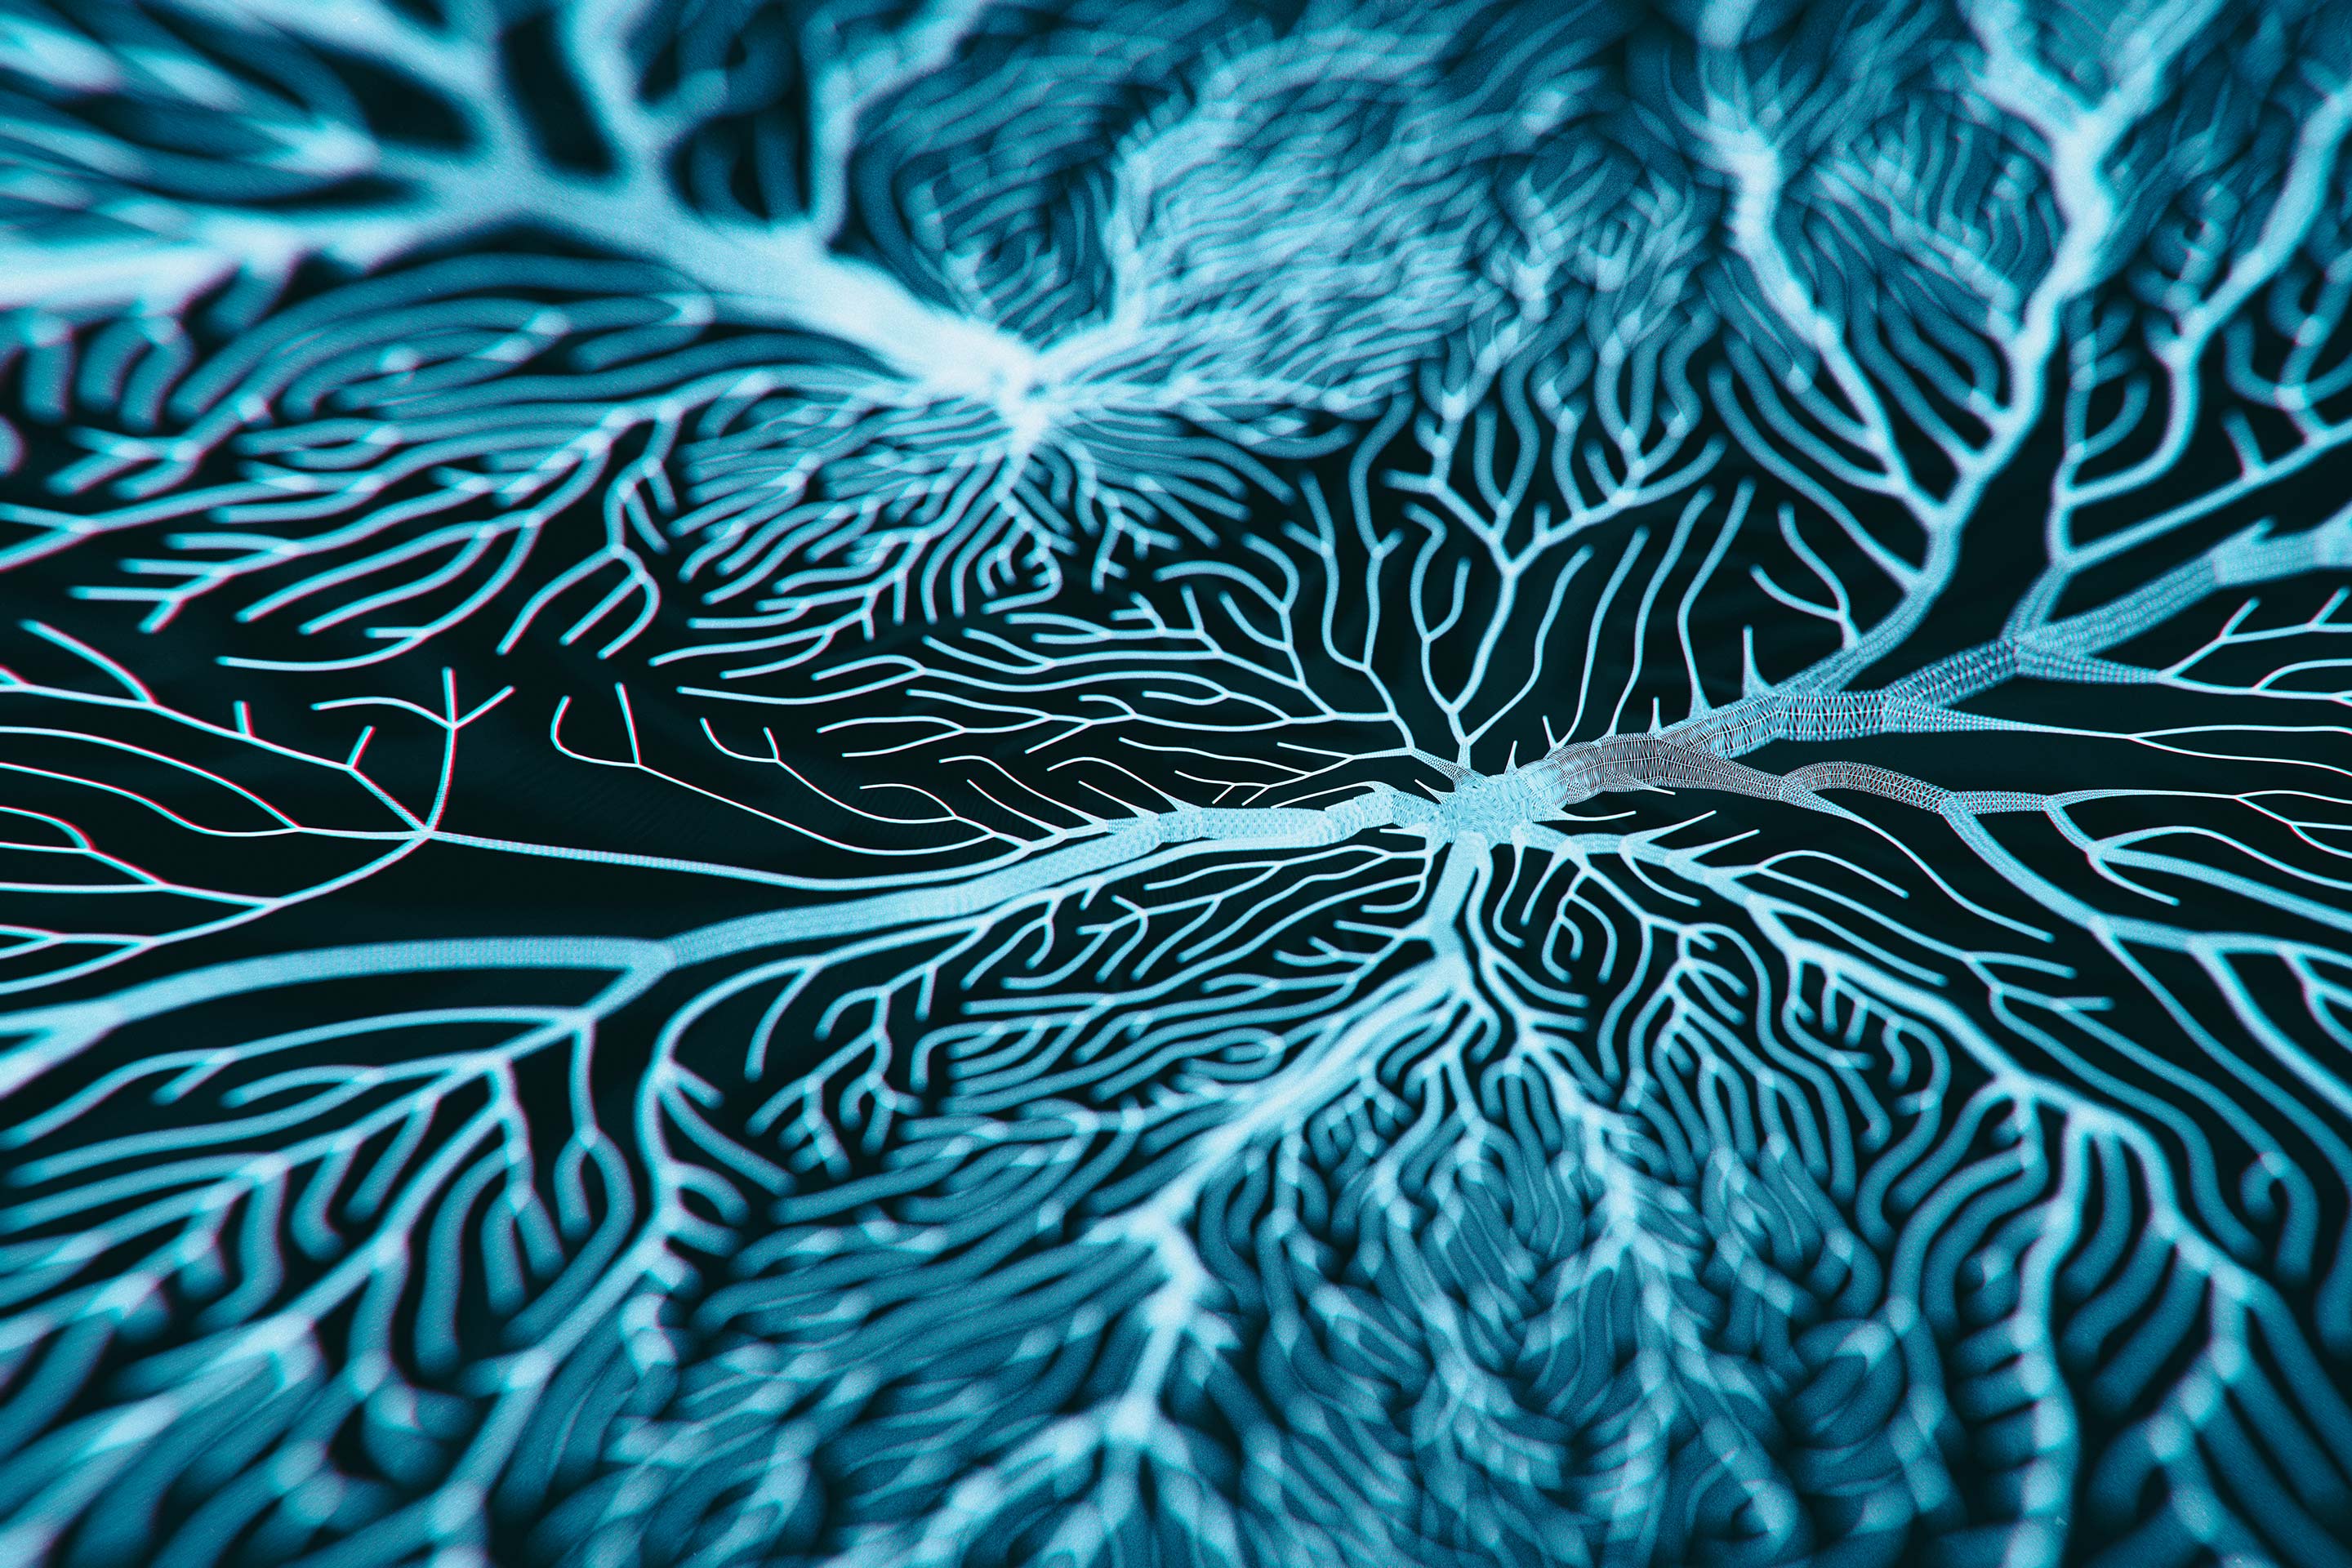 Electric blue coral branches out across a black background, expressing our connections to each other